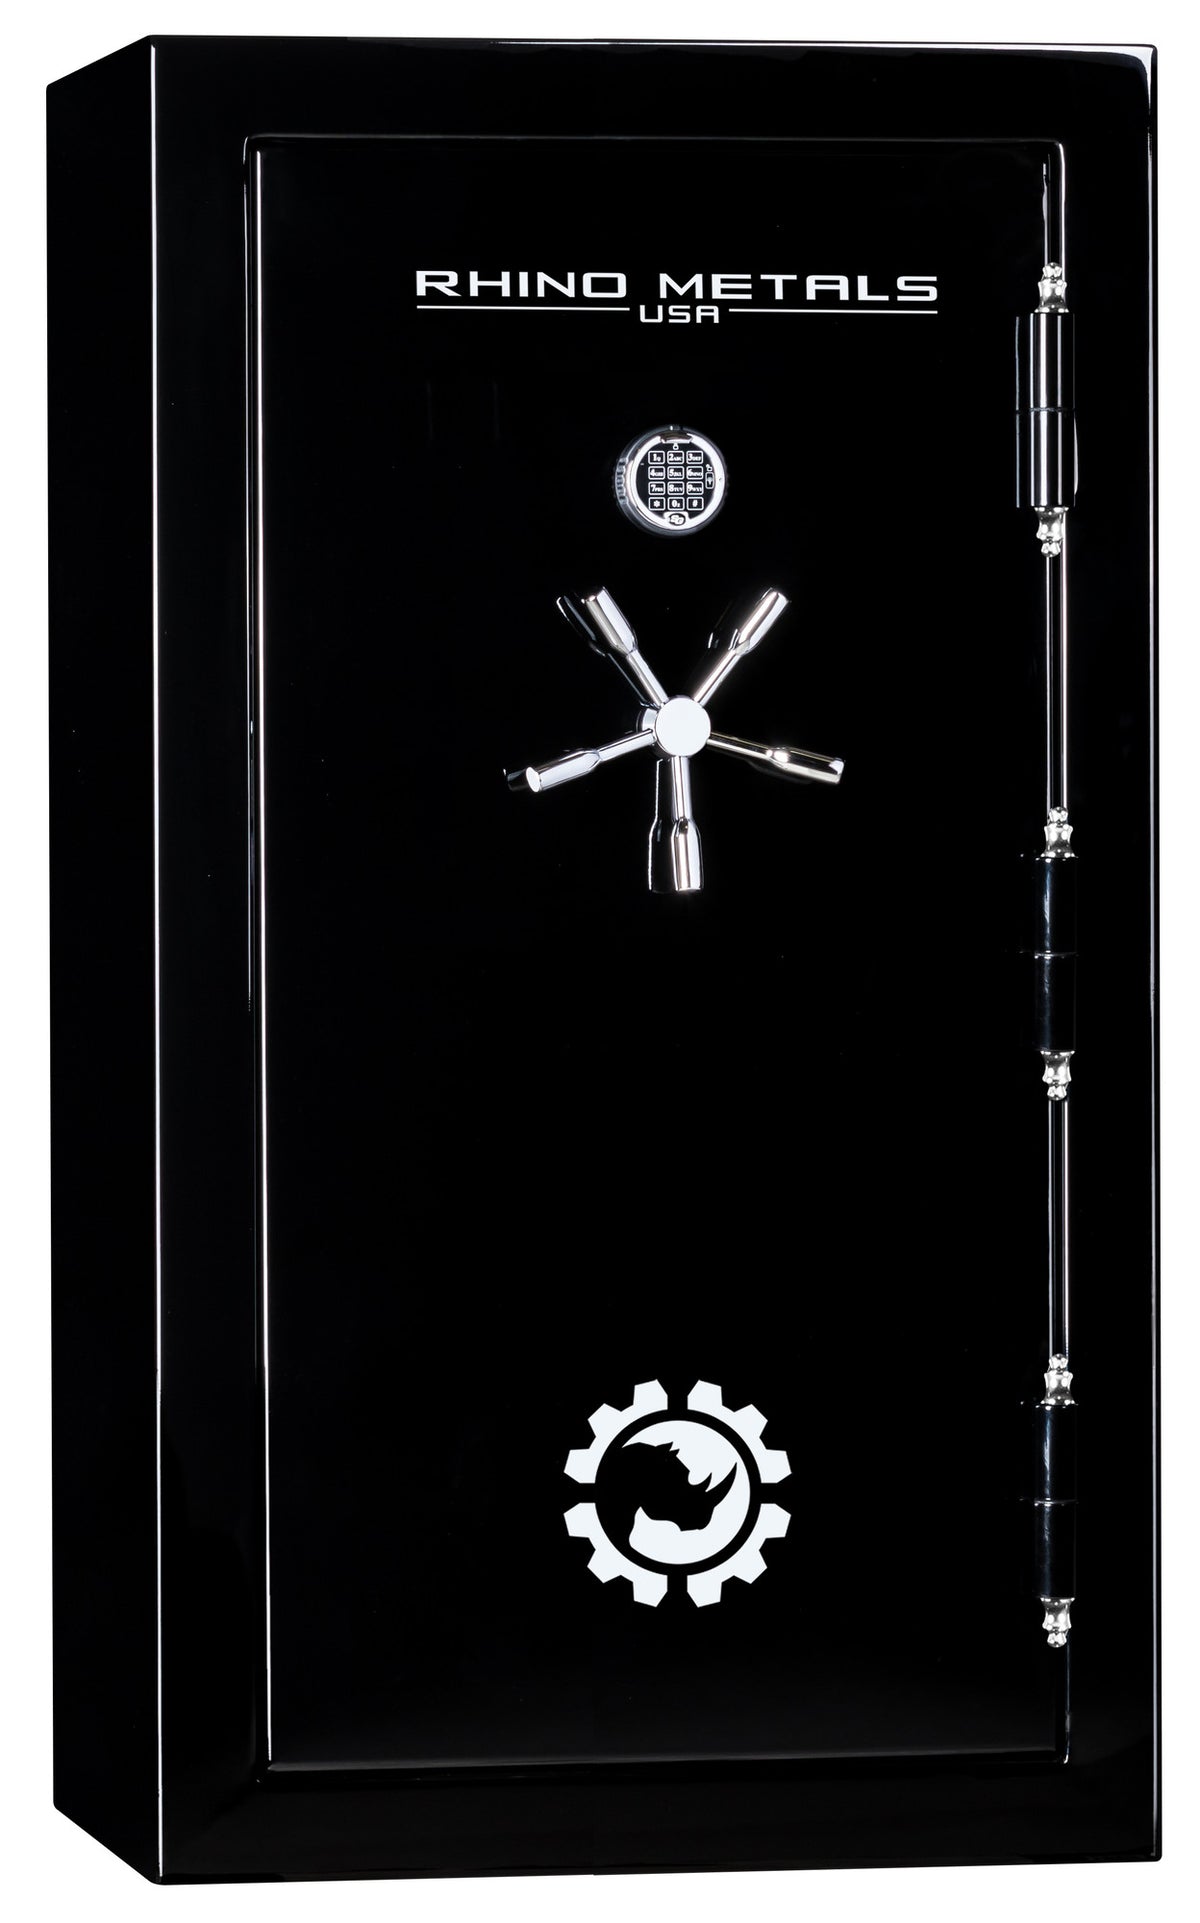 Rhino Thunderbolt RT | 36 | 160 Minute Fire Protection | Black Gloss | Electronic Lock | 60&quot;(H) x 33&quot;(W) x 27&quot;(D)